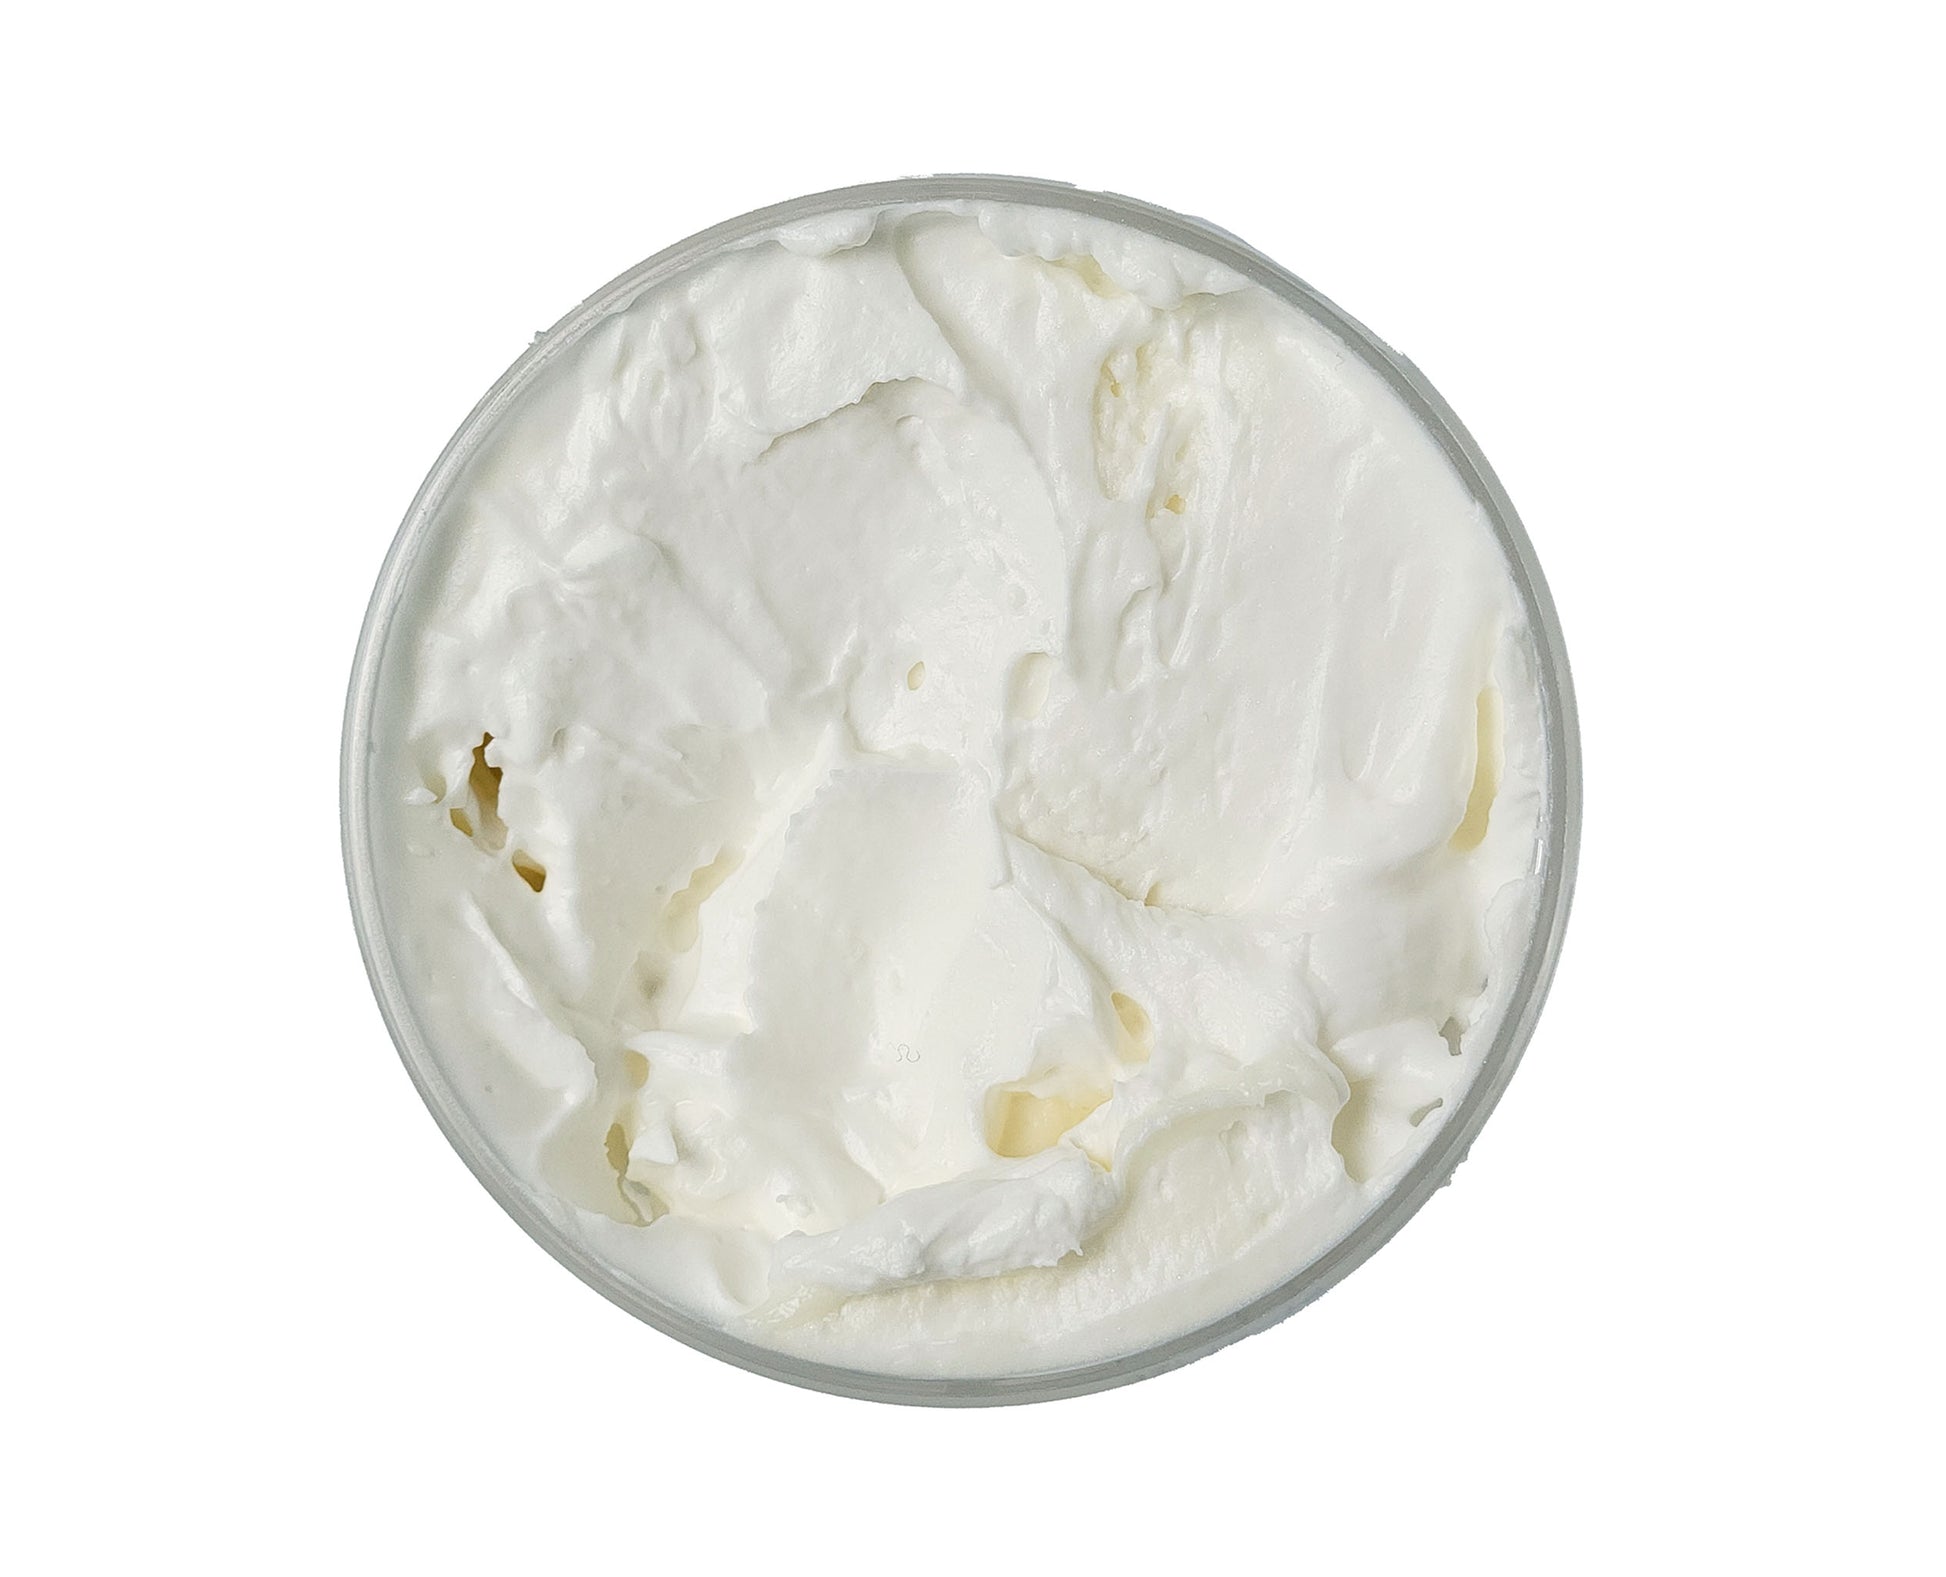 Shave Butter for Dry Skin made with Shea Butter and Goat Milk